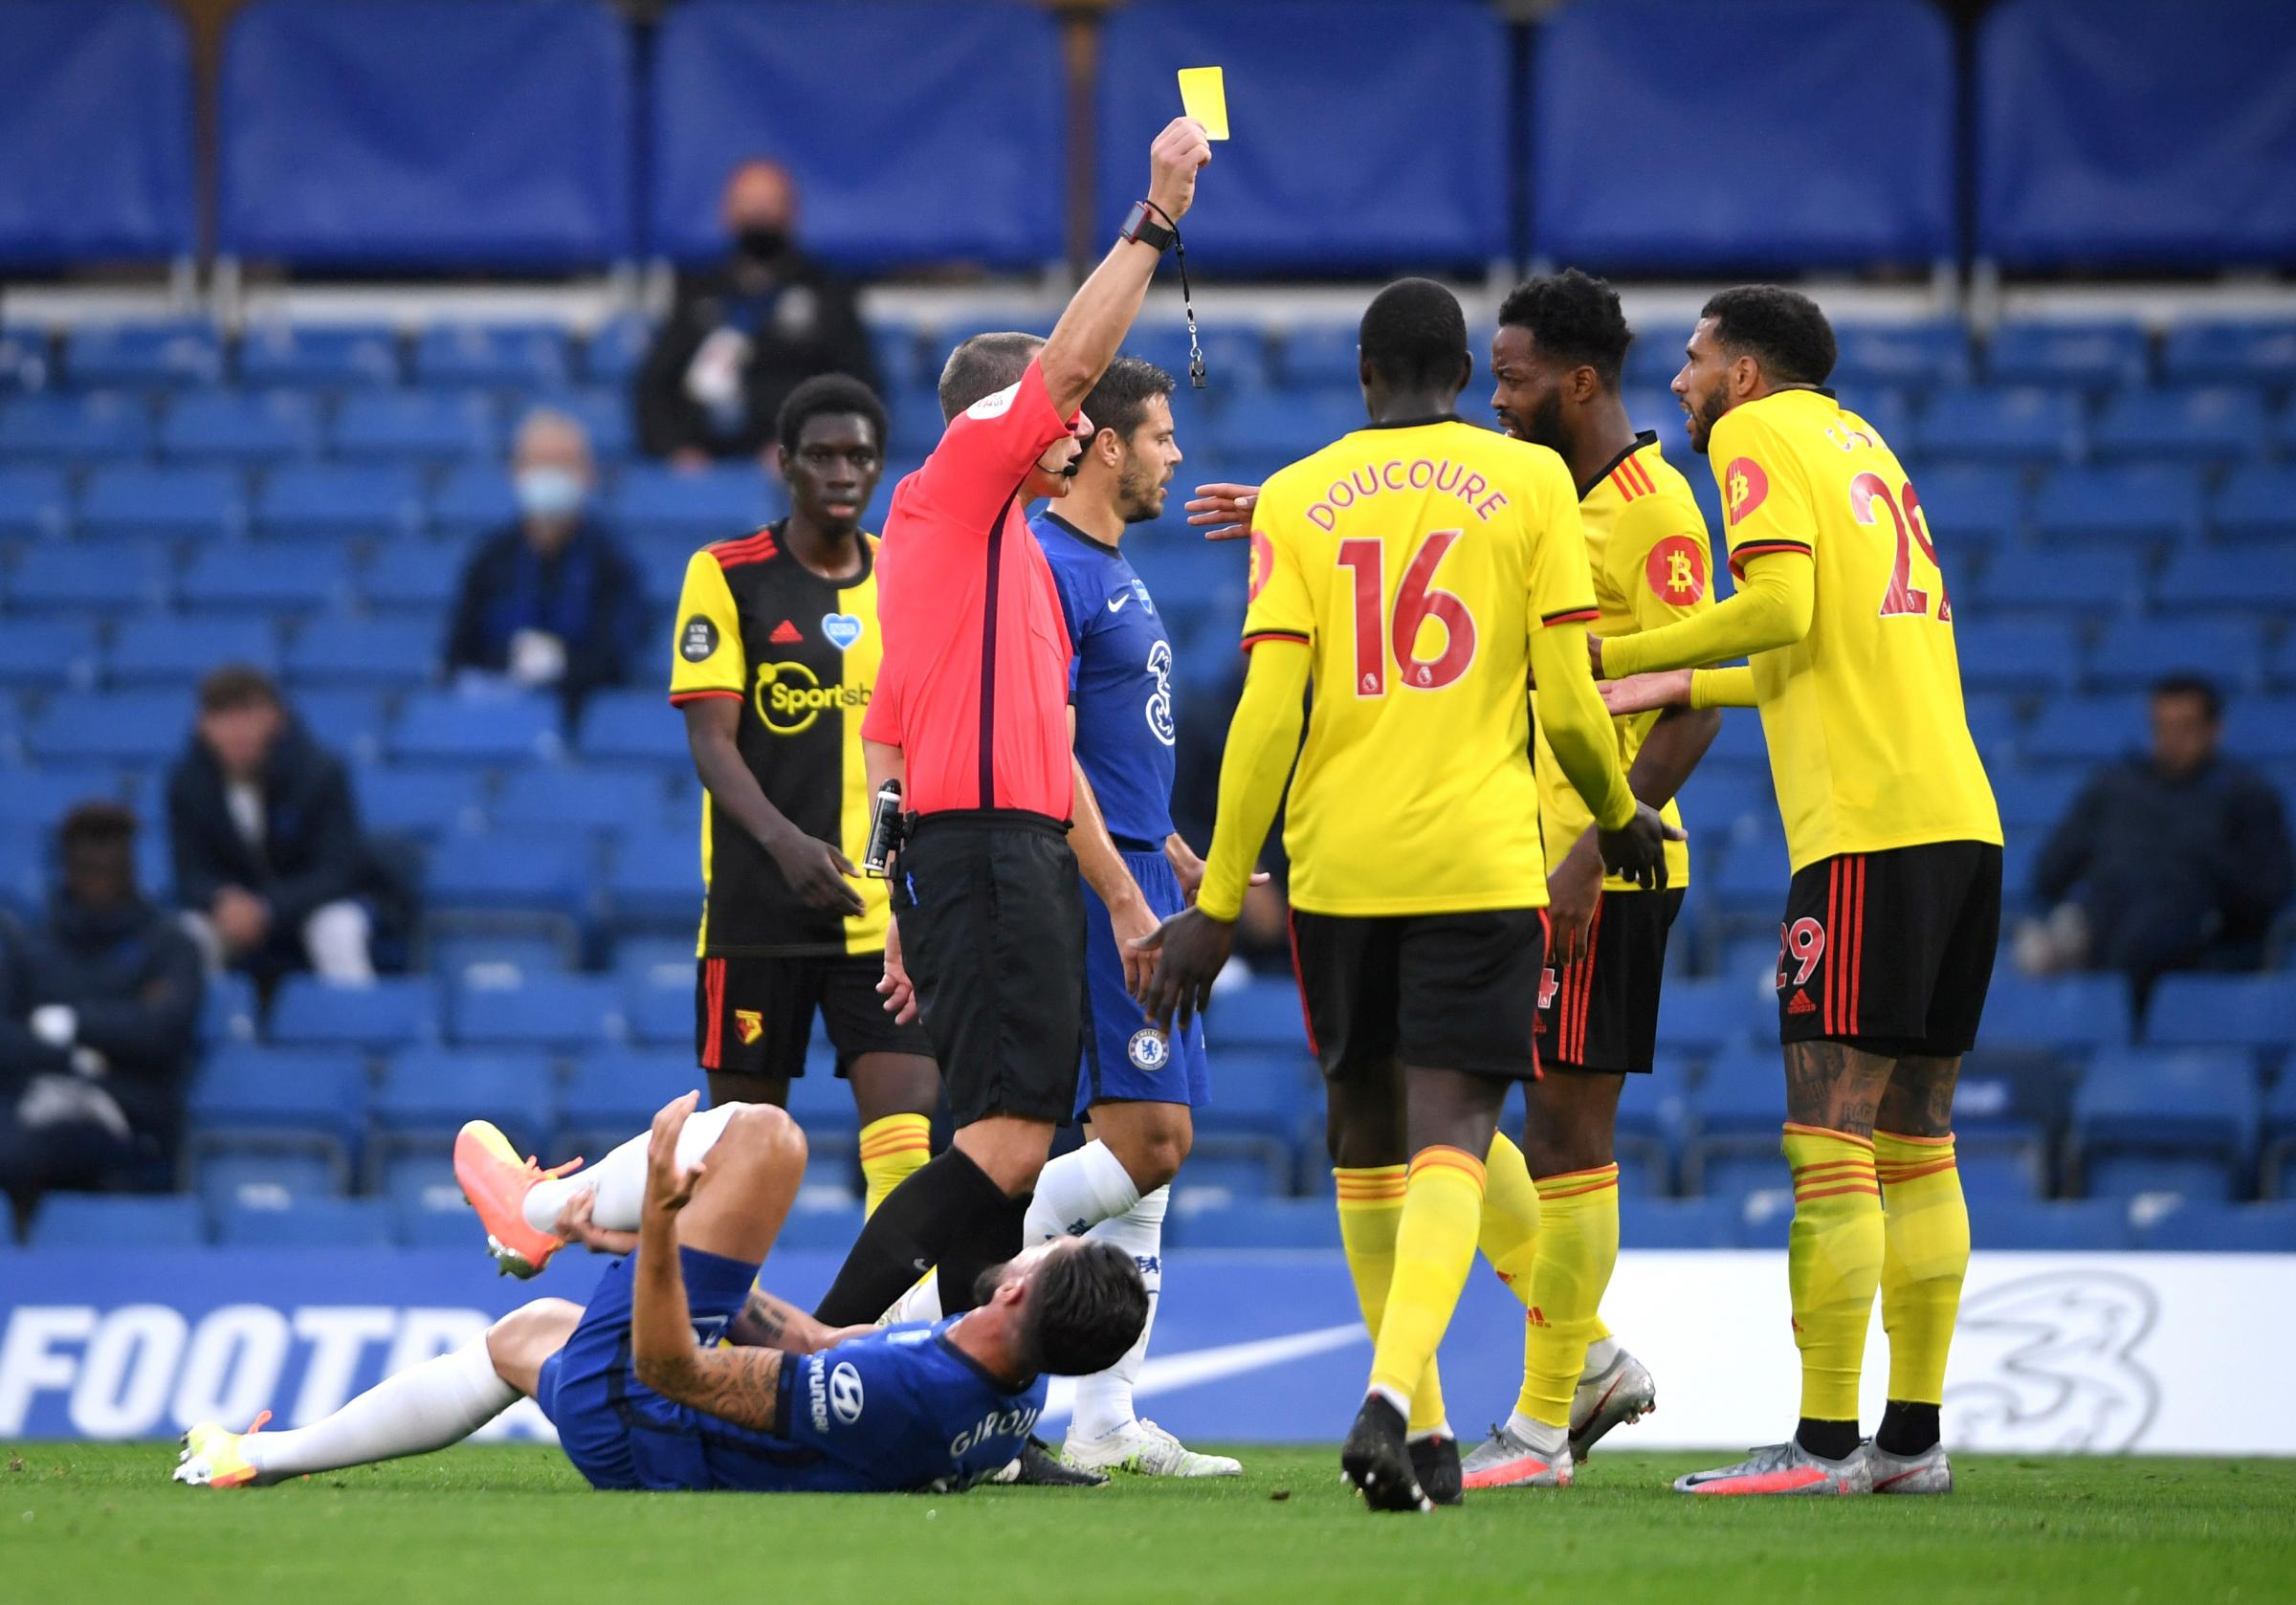 Kevin Friend set to referee Watford's trip to Arsenal